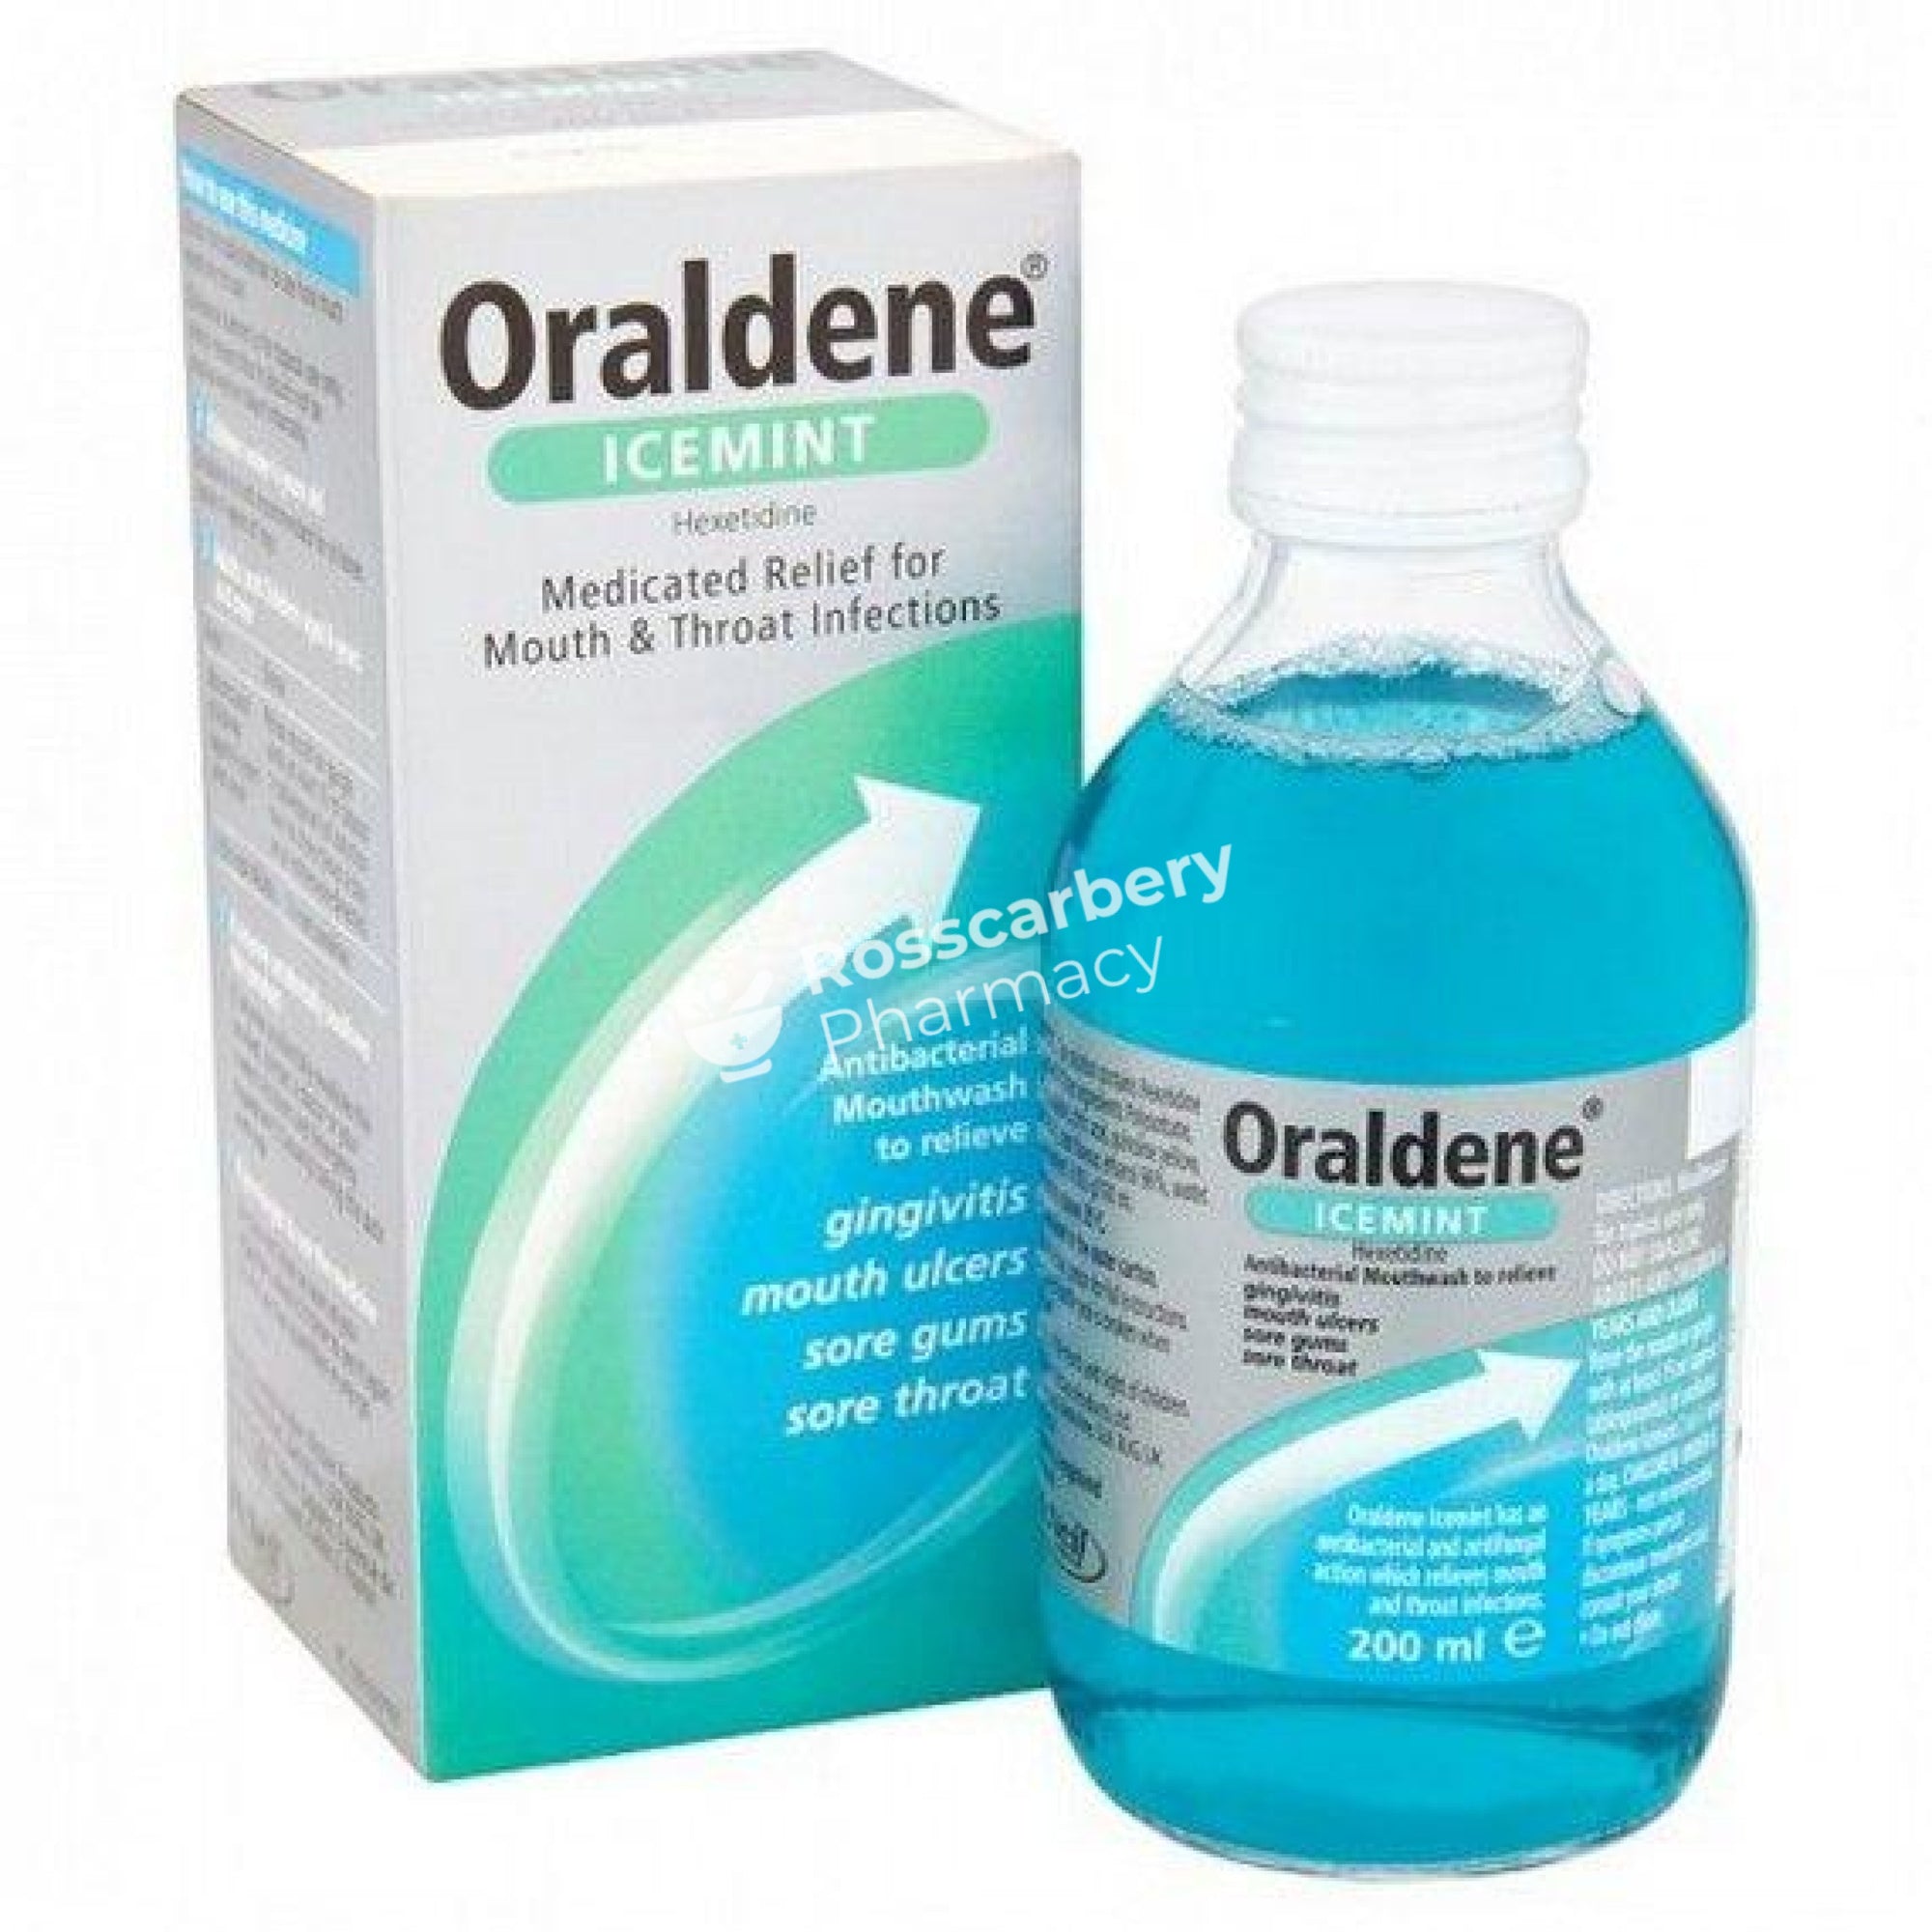 Oraldene Gargle/mouthwash Medicated Relief For Mouth & Throat Infections Mouthwash